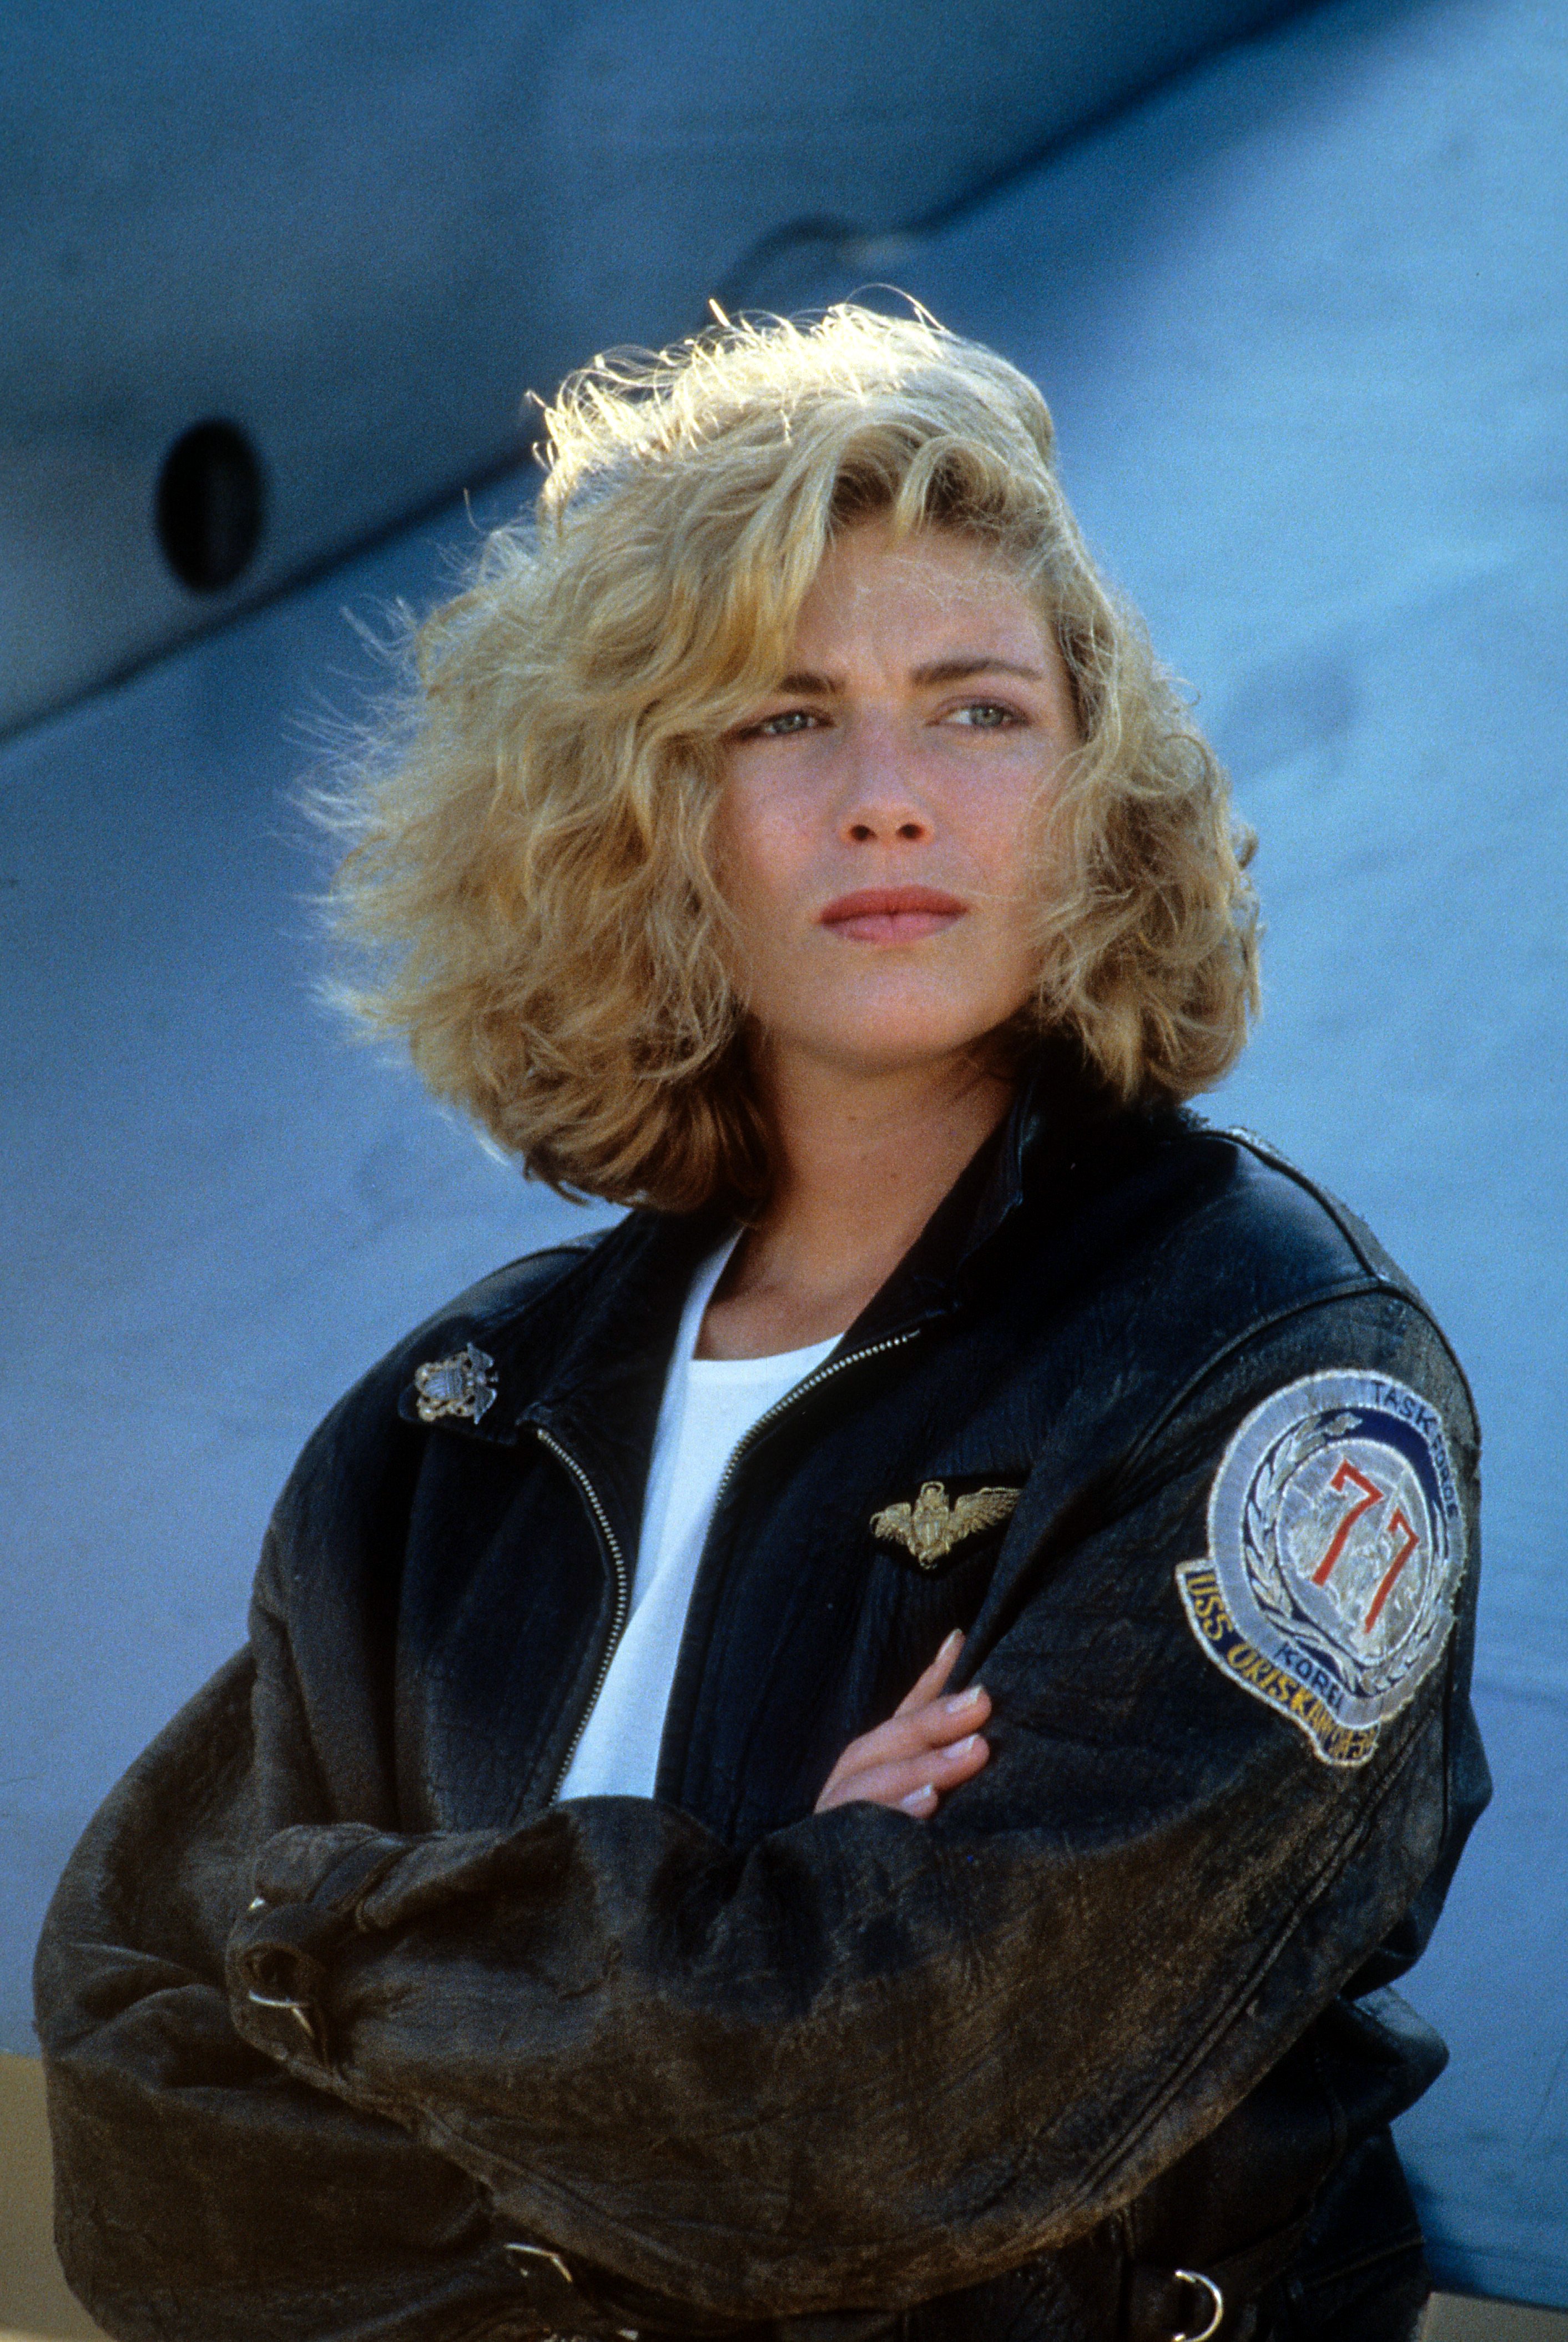 Photo of Kelly McGillis in a scene from "Top Gun" in 1986 | Source: Getty Images